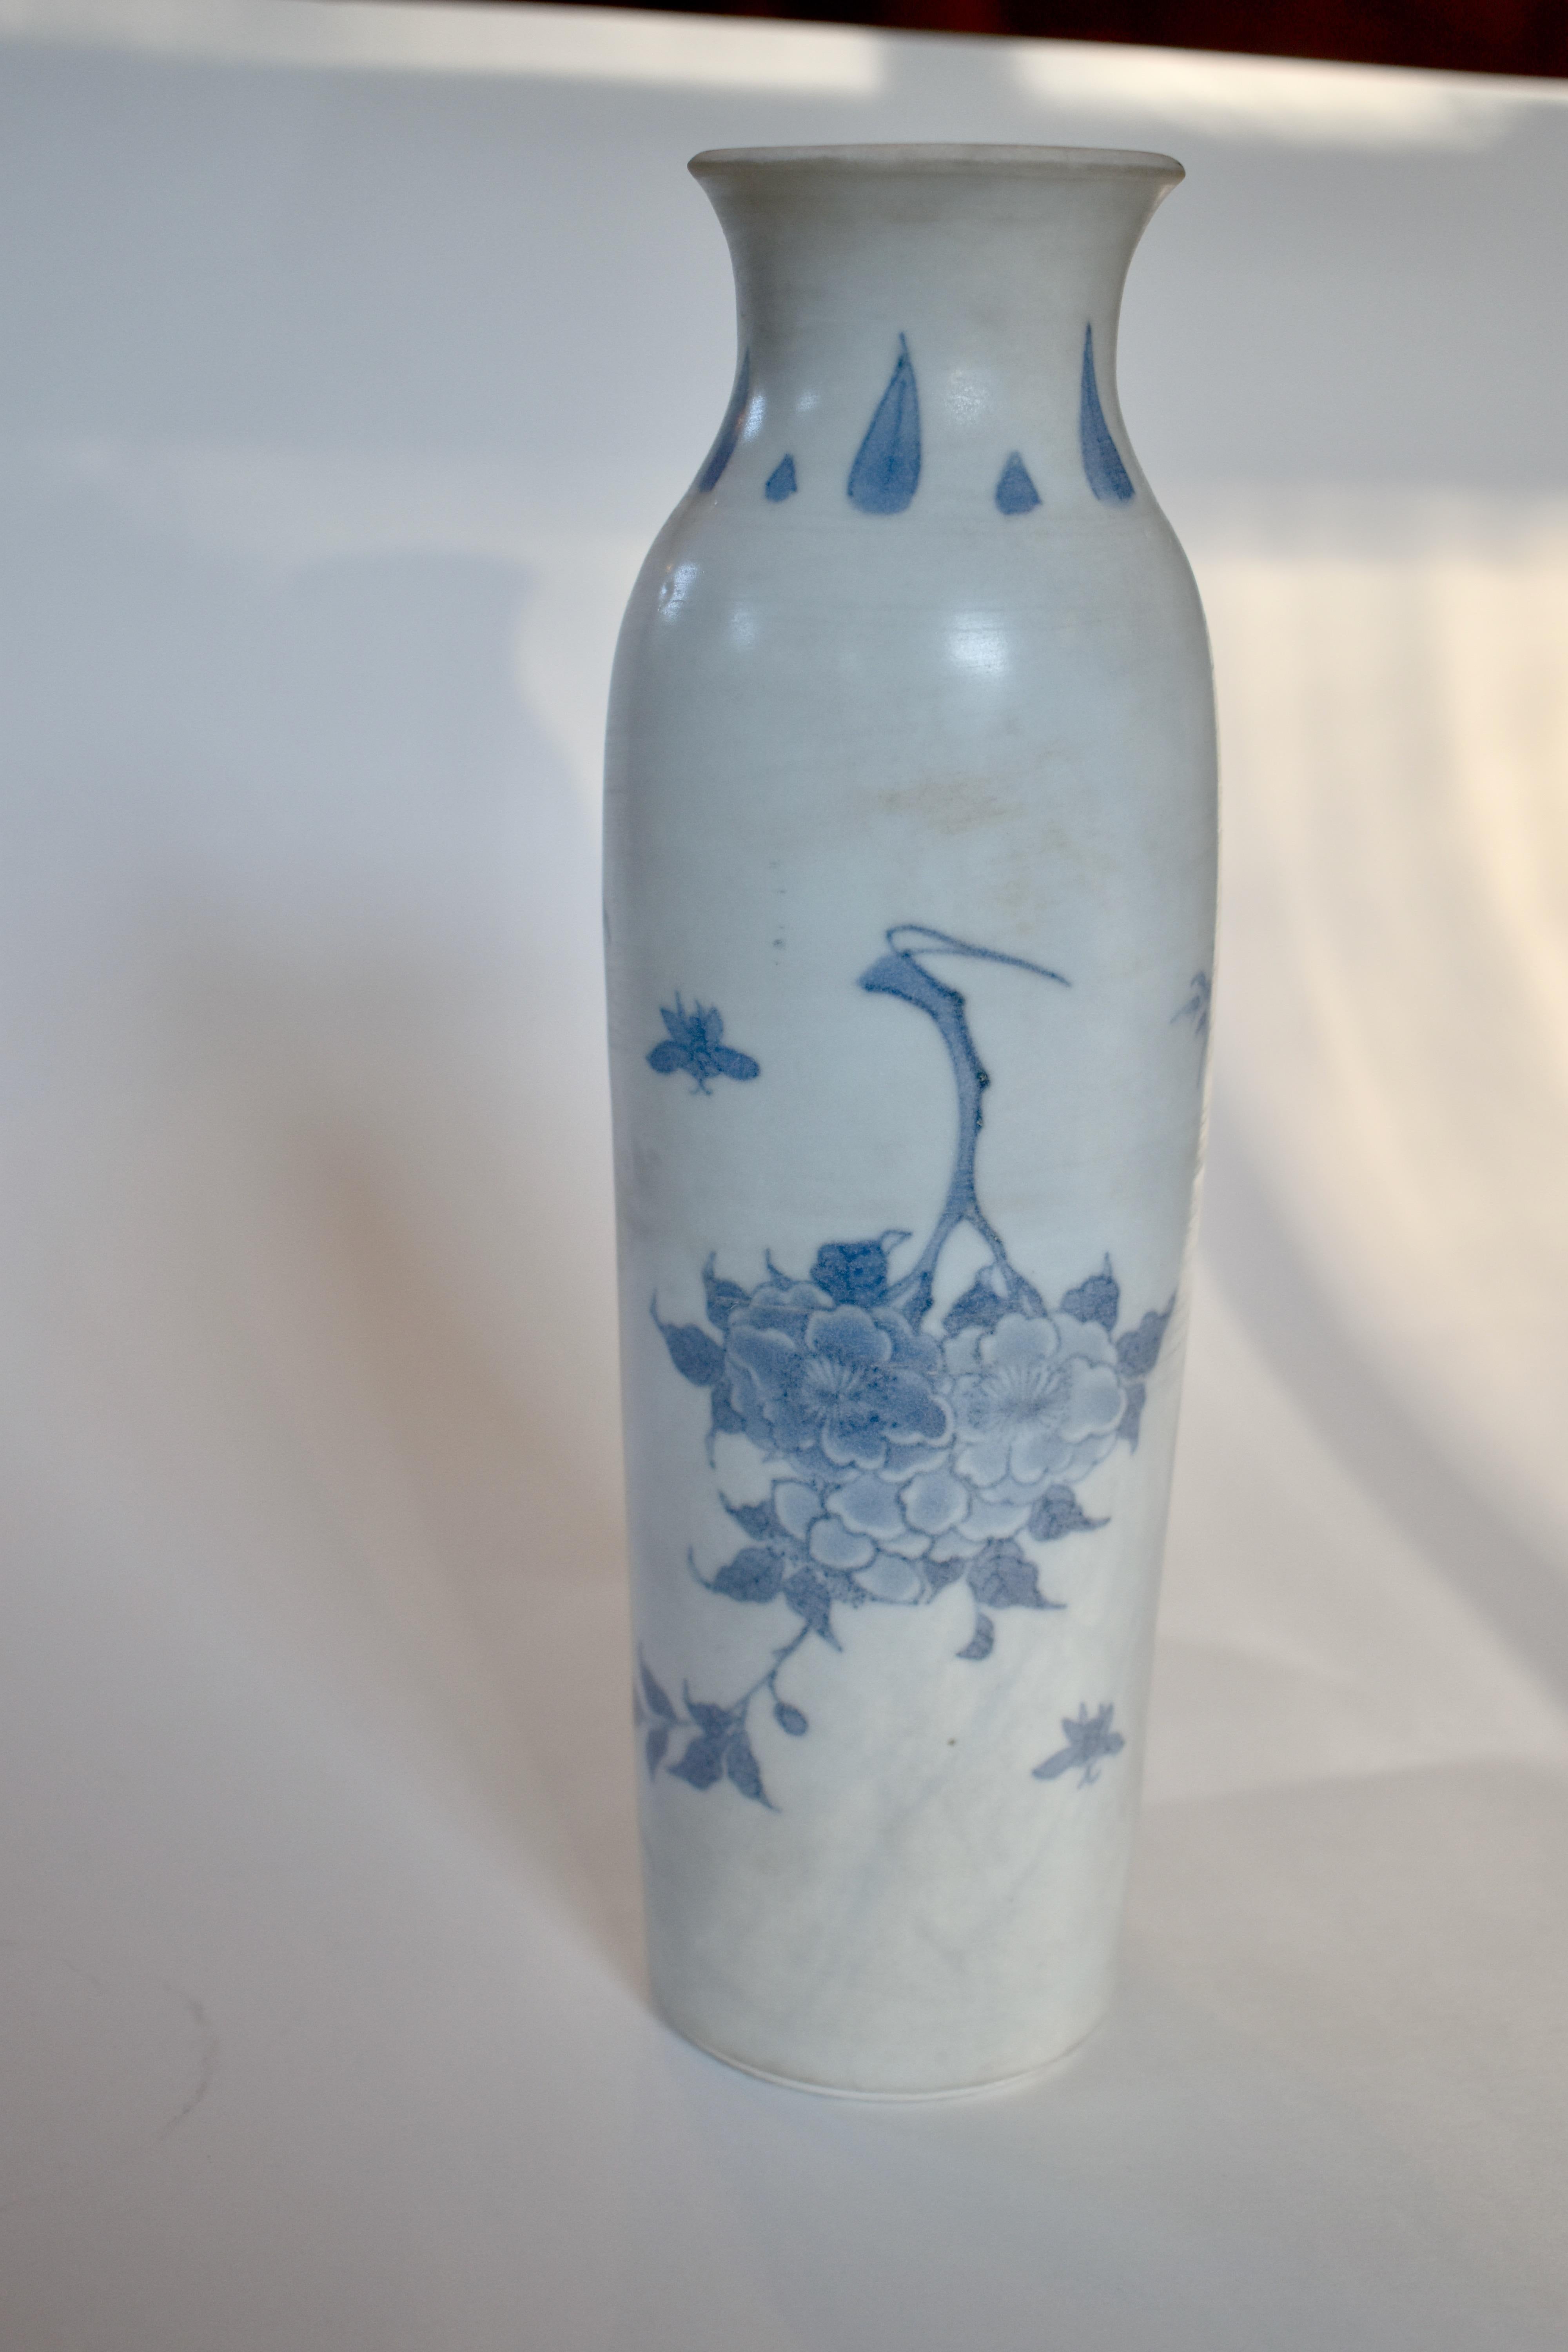 Transitional Period blue and white porcelain sleeve vase from the Hatcher Collection. 

This elegant vase was part of a hoard recovered by Captain Michael Hatcher from the wreck of a ship that sunk in the South China Sea in 1643. Approximately